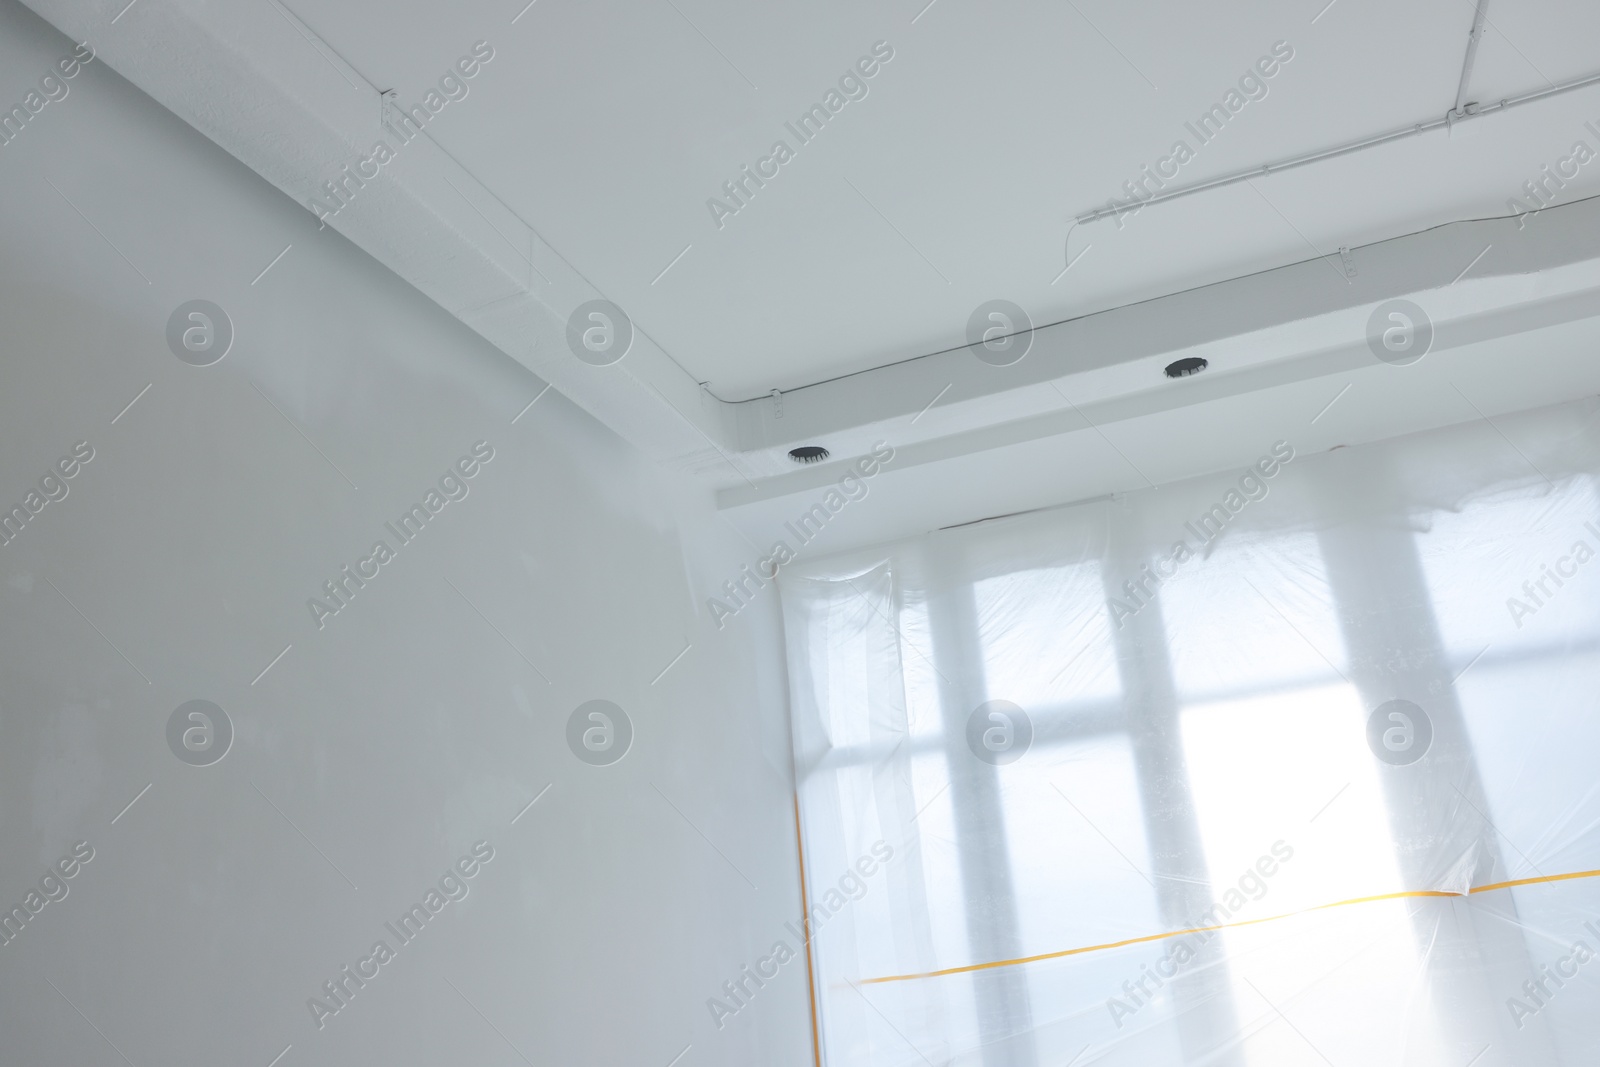 Photo of Big windows covered with plastic film indoors